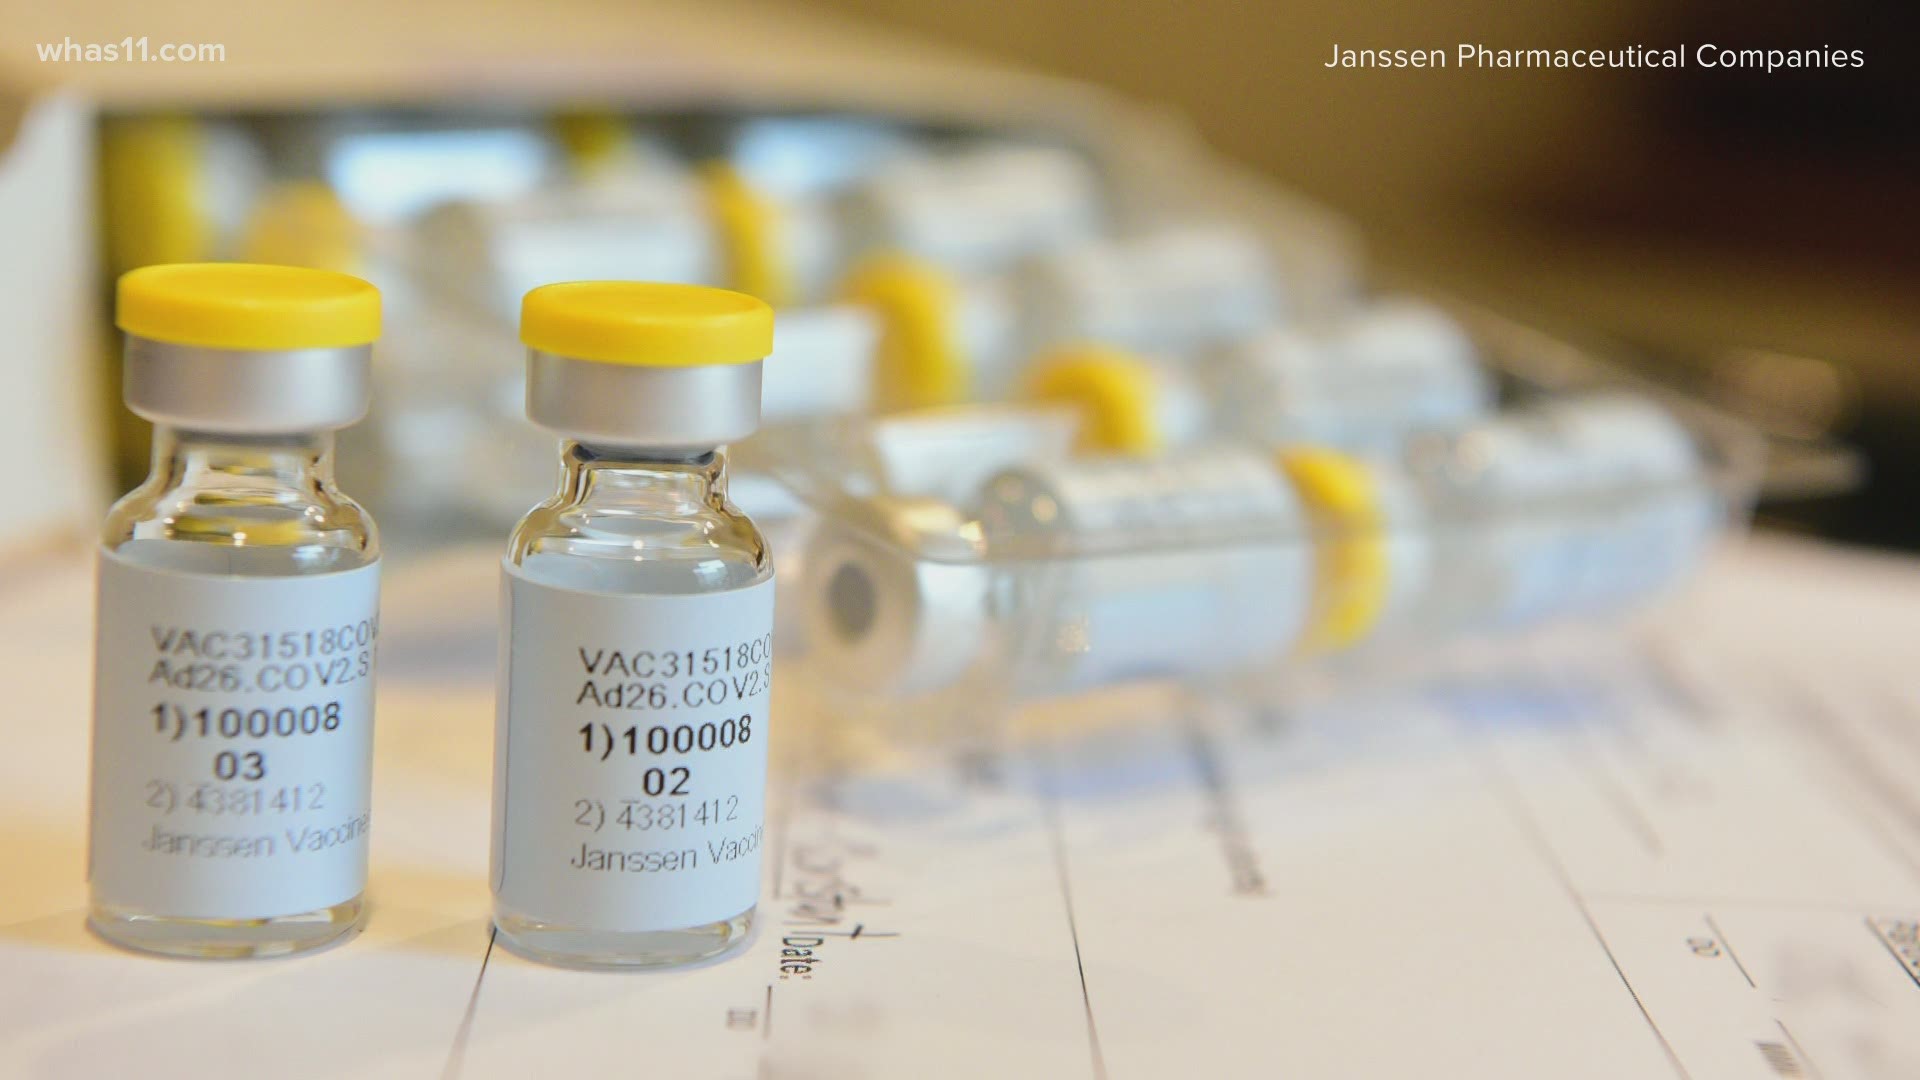 Johnson & Johnson's vaccine appears to protect against COVID-19 with just one shot.